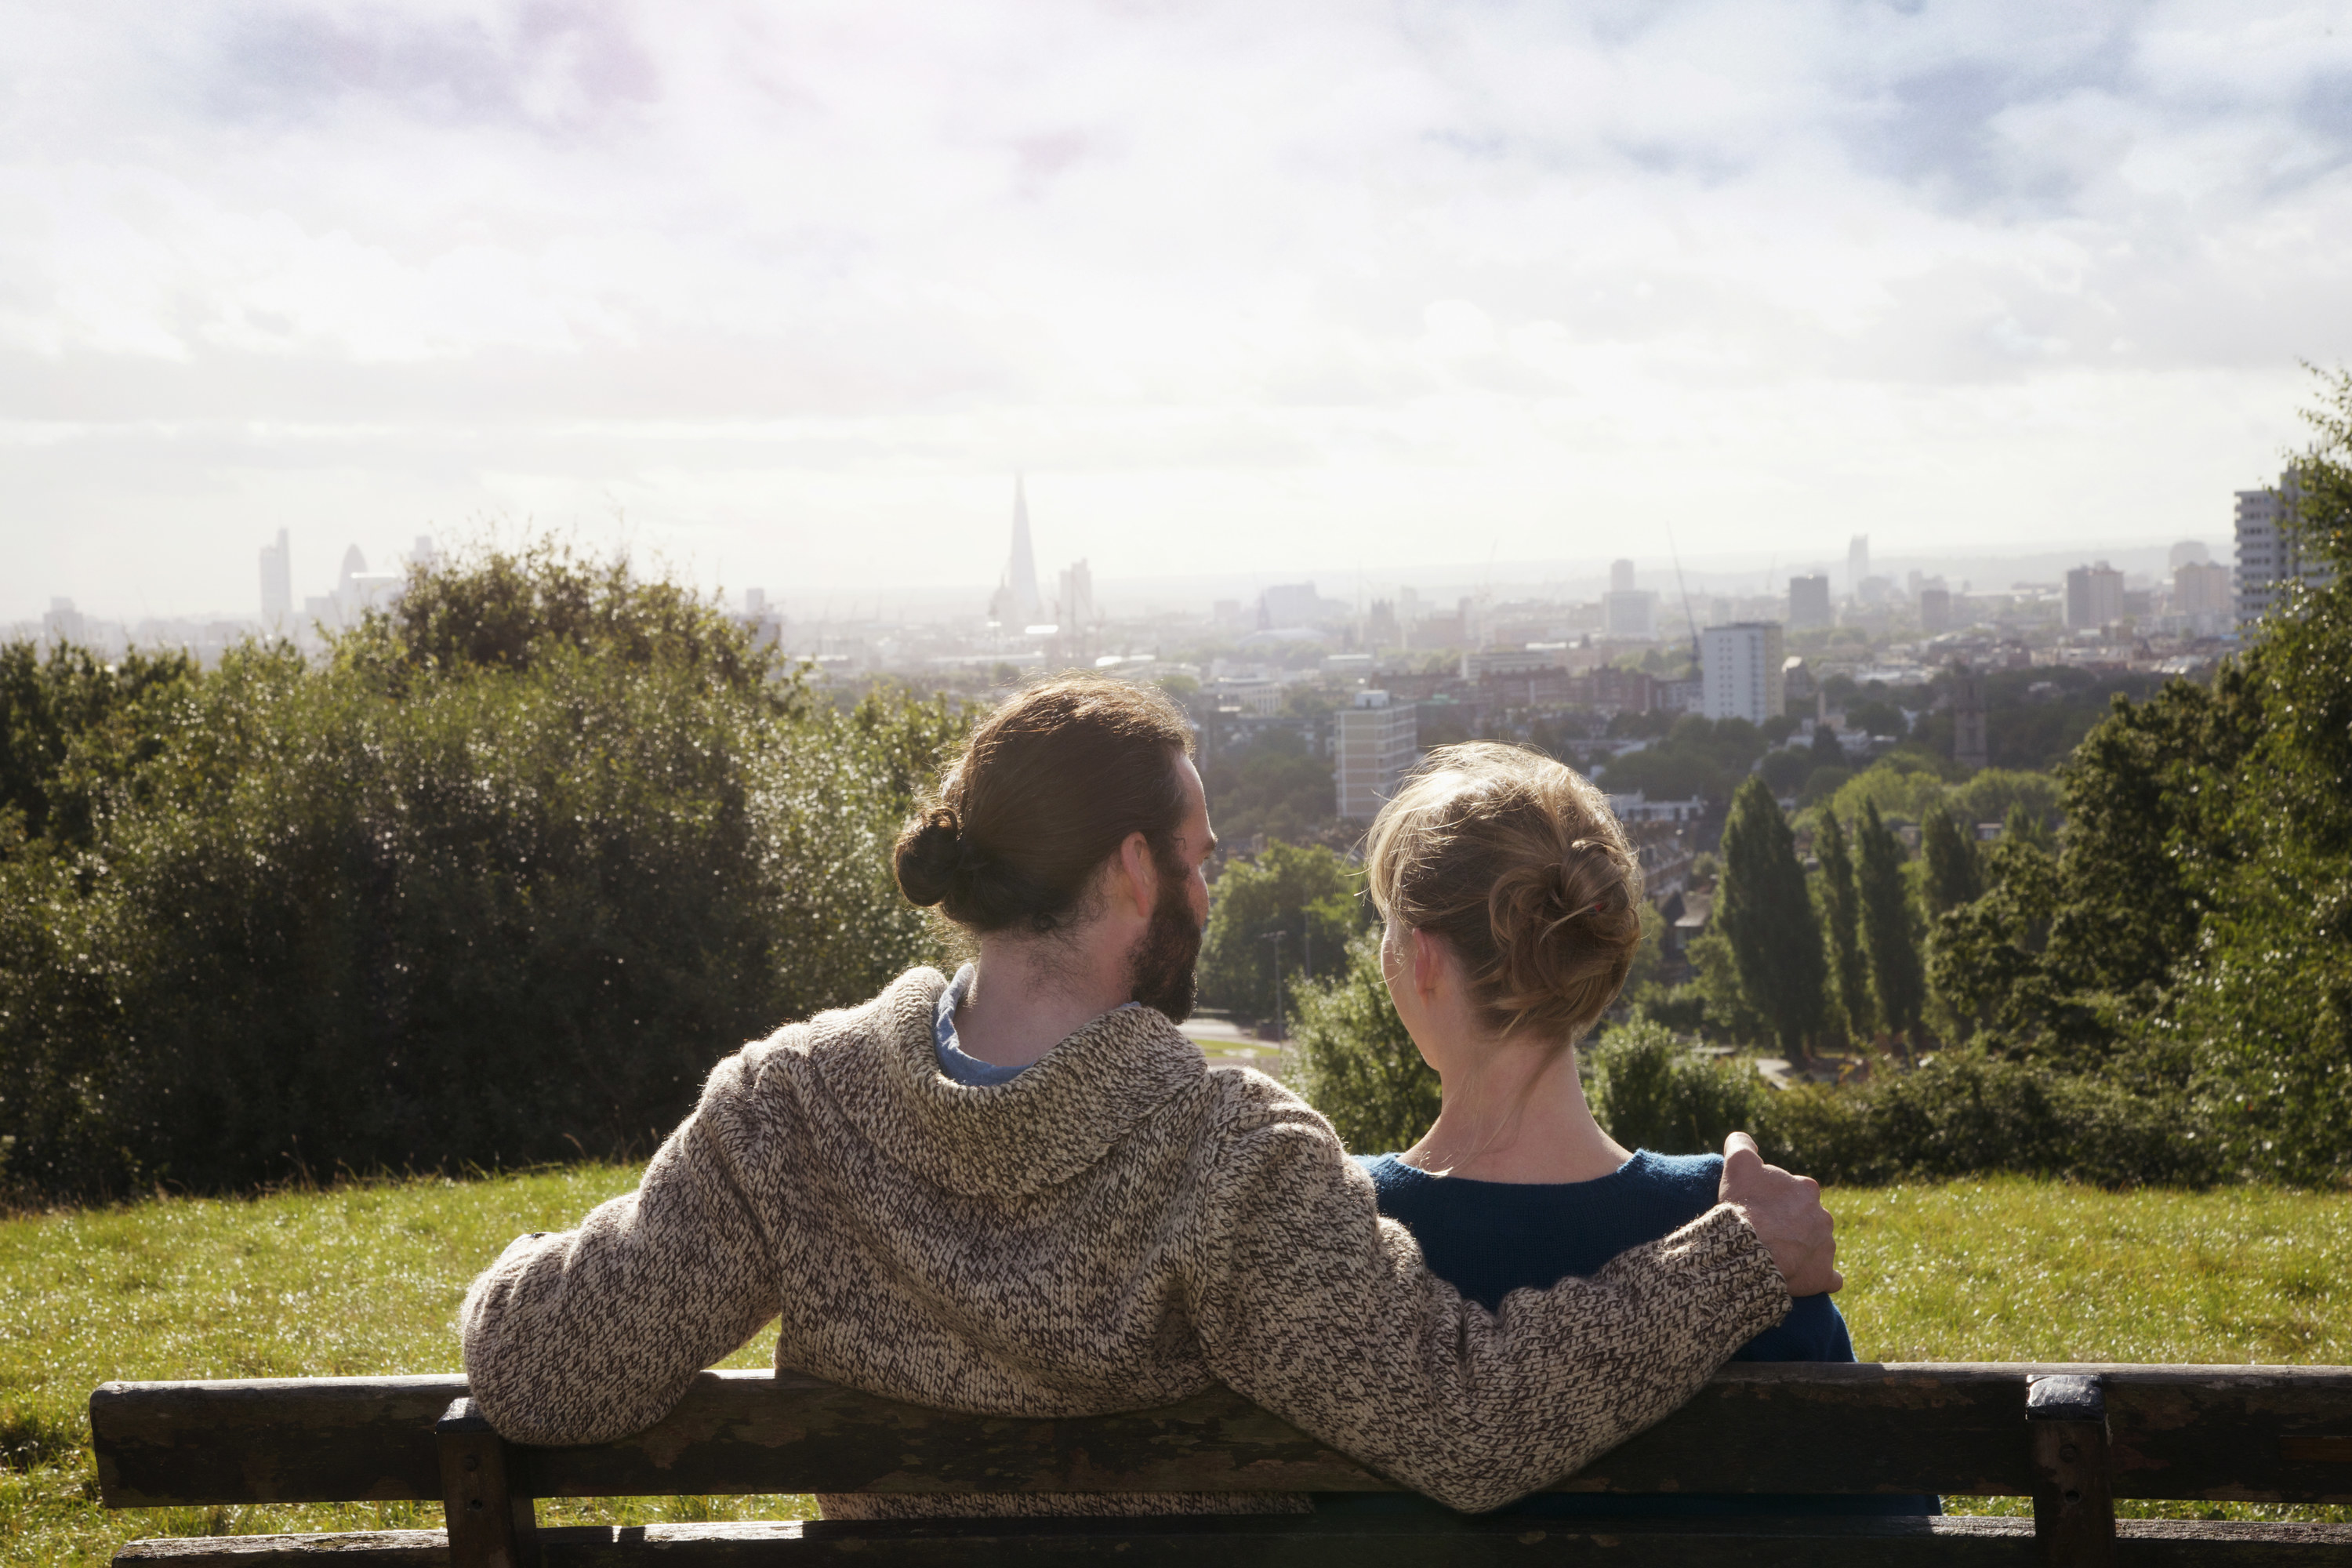 A couple sits on a bench with a view overlooking the city